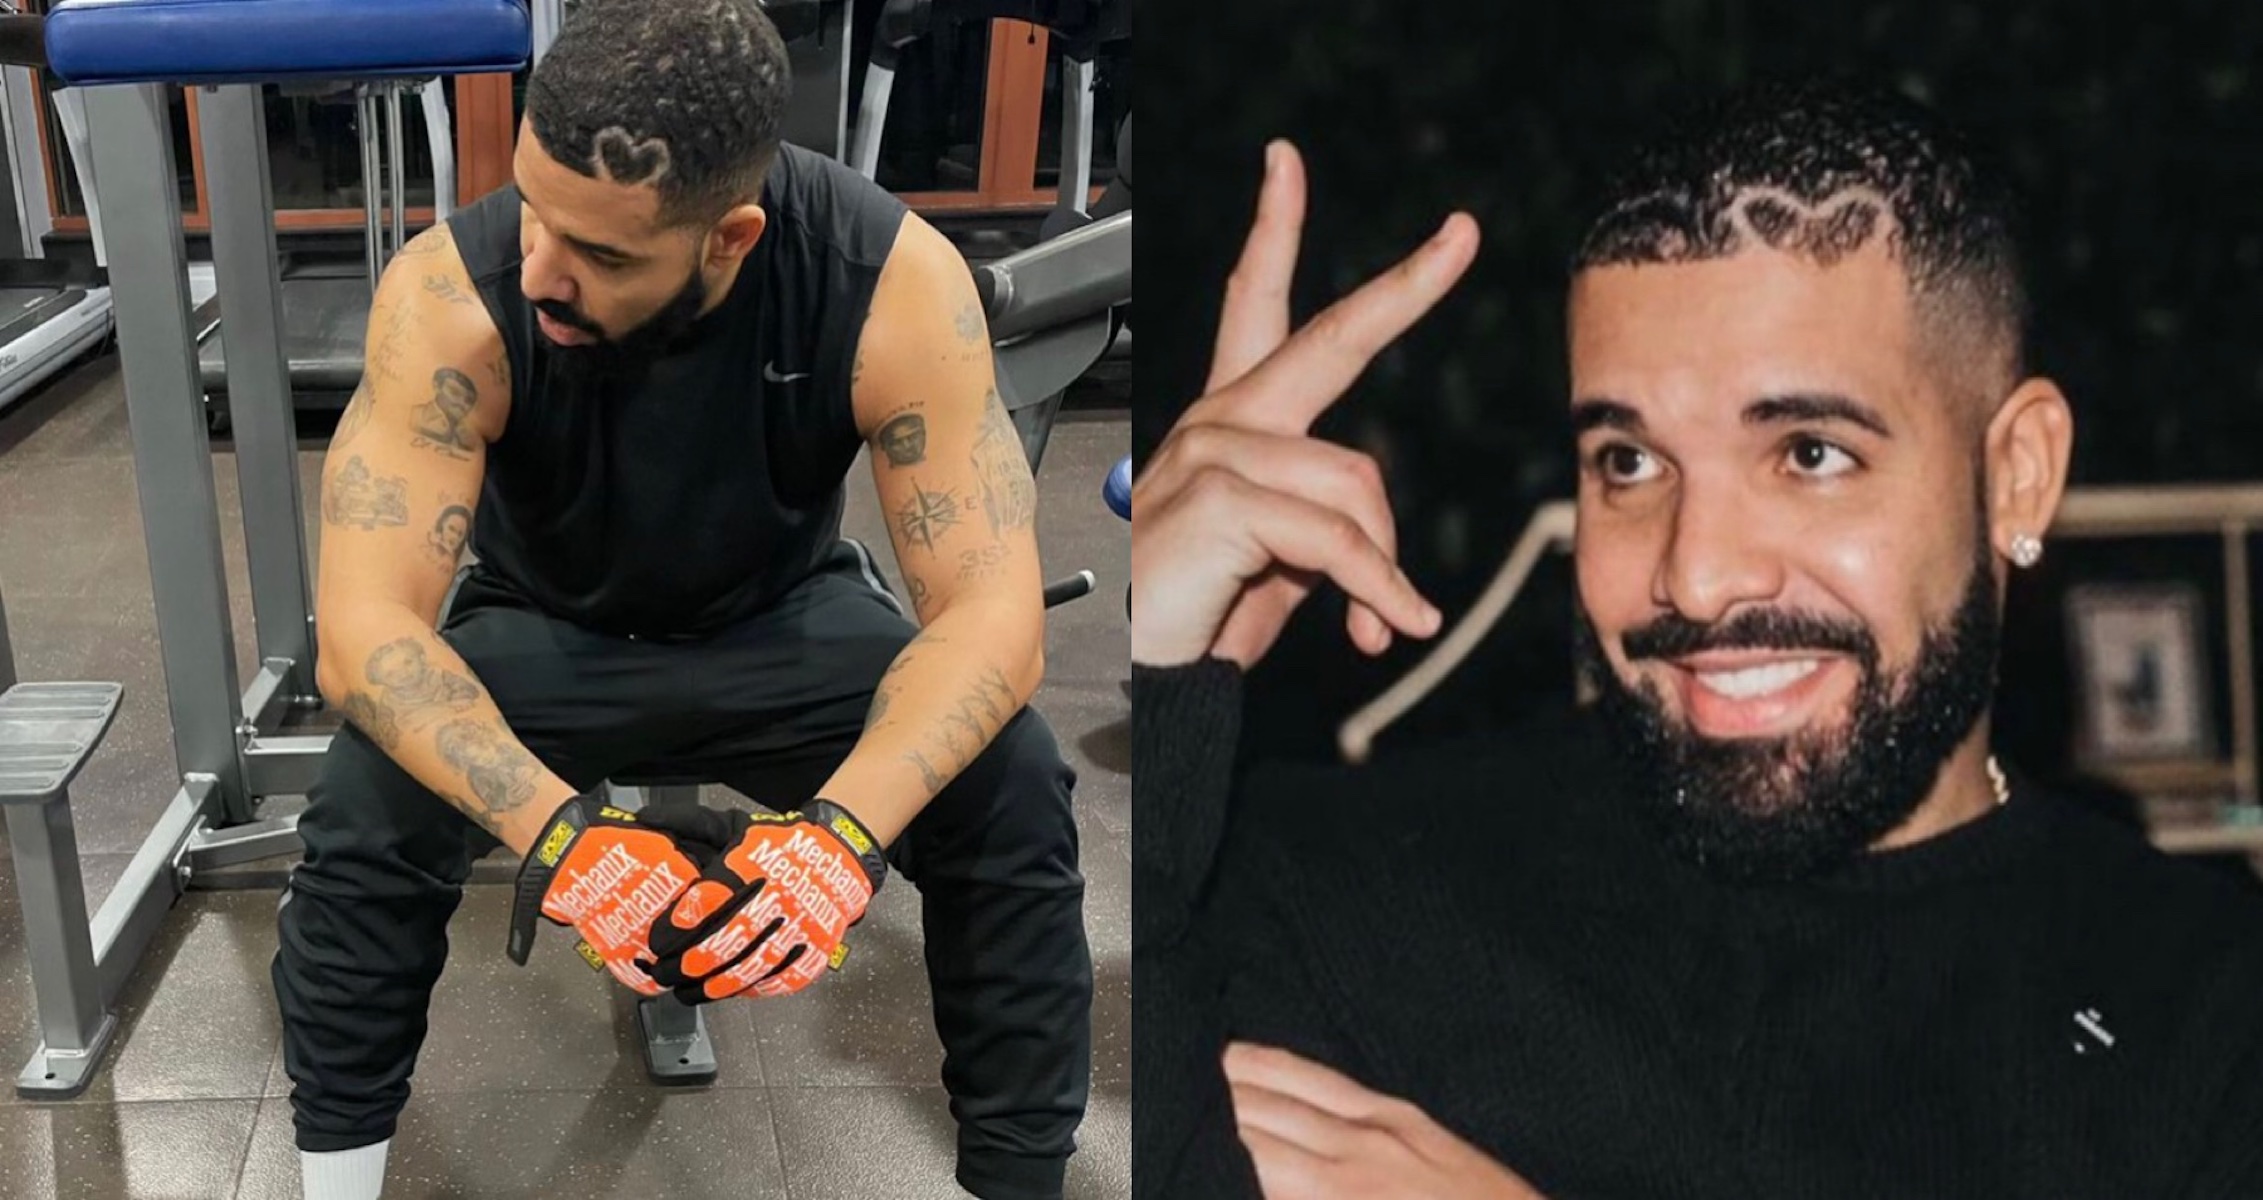 Recent Study Shows Drake’s Songs Make People Run Slower During Cardio